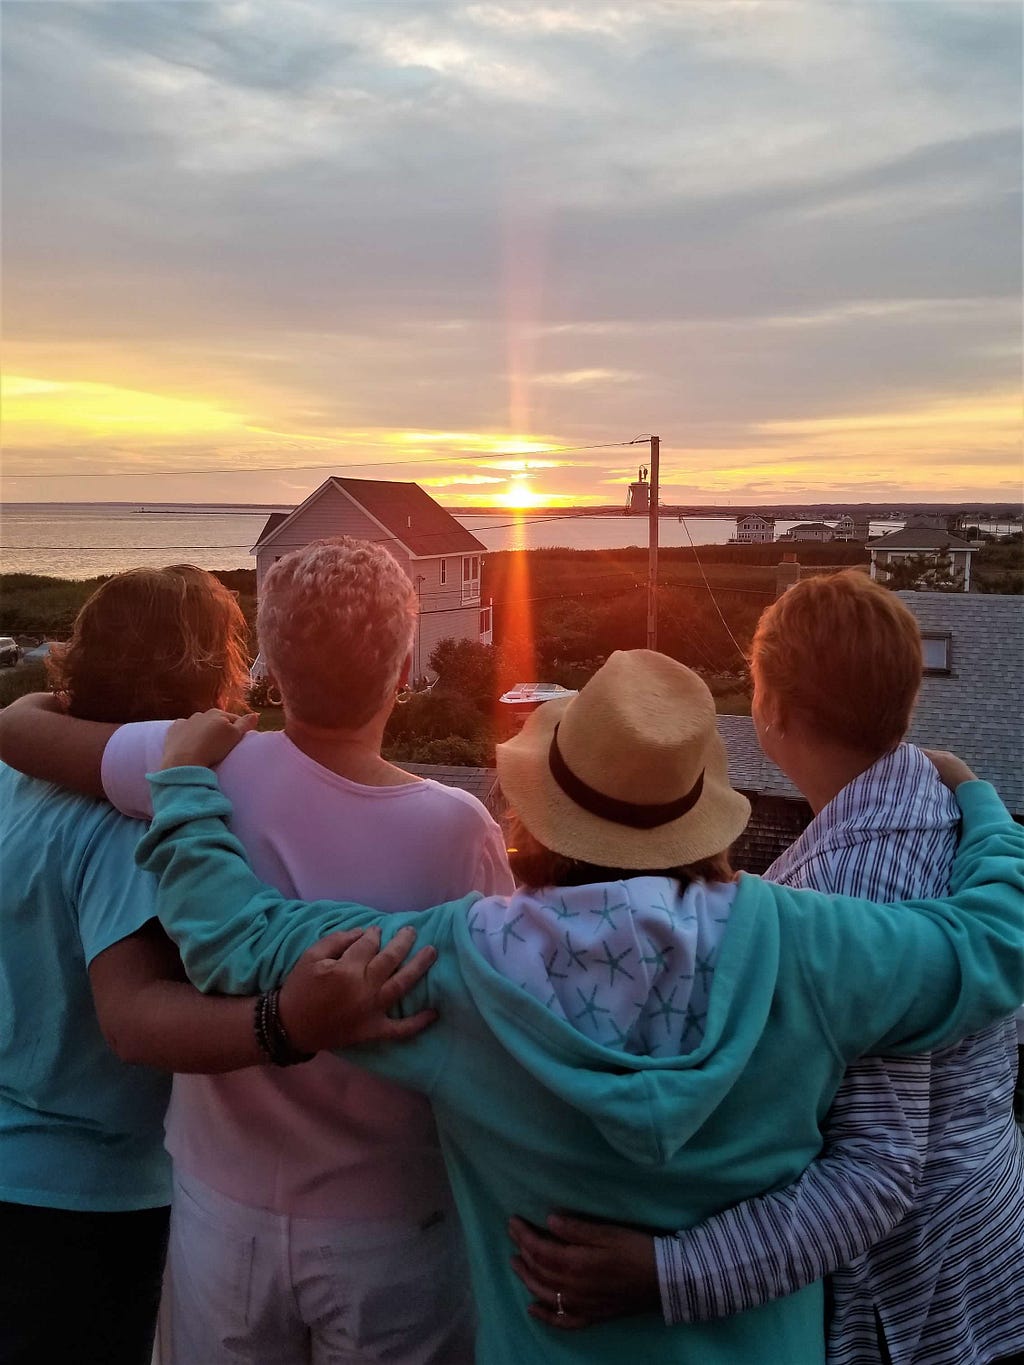 D with 3 of her best friends watching the sunset at beach house in Rhode Island